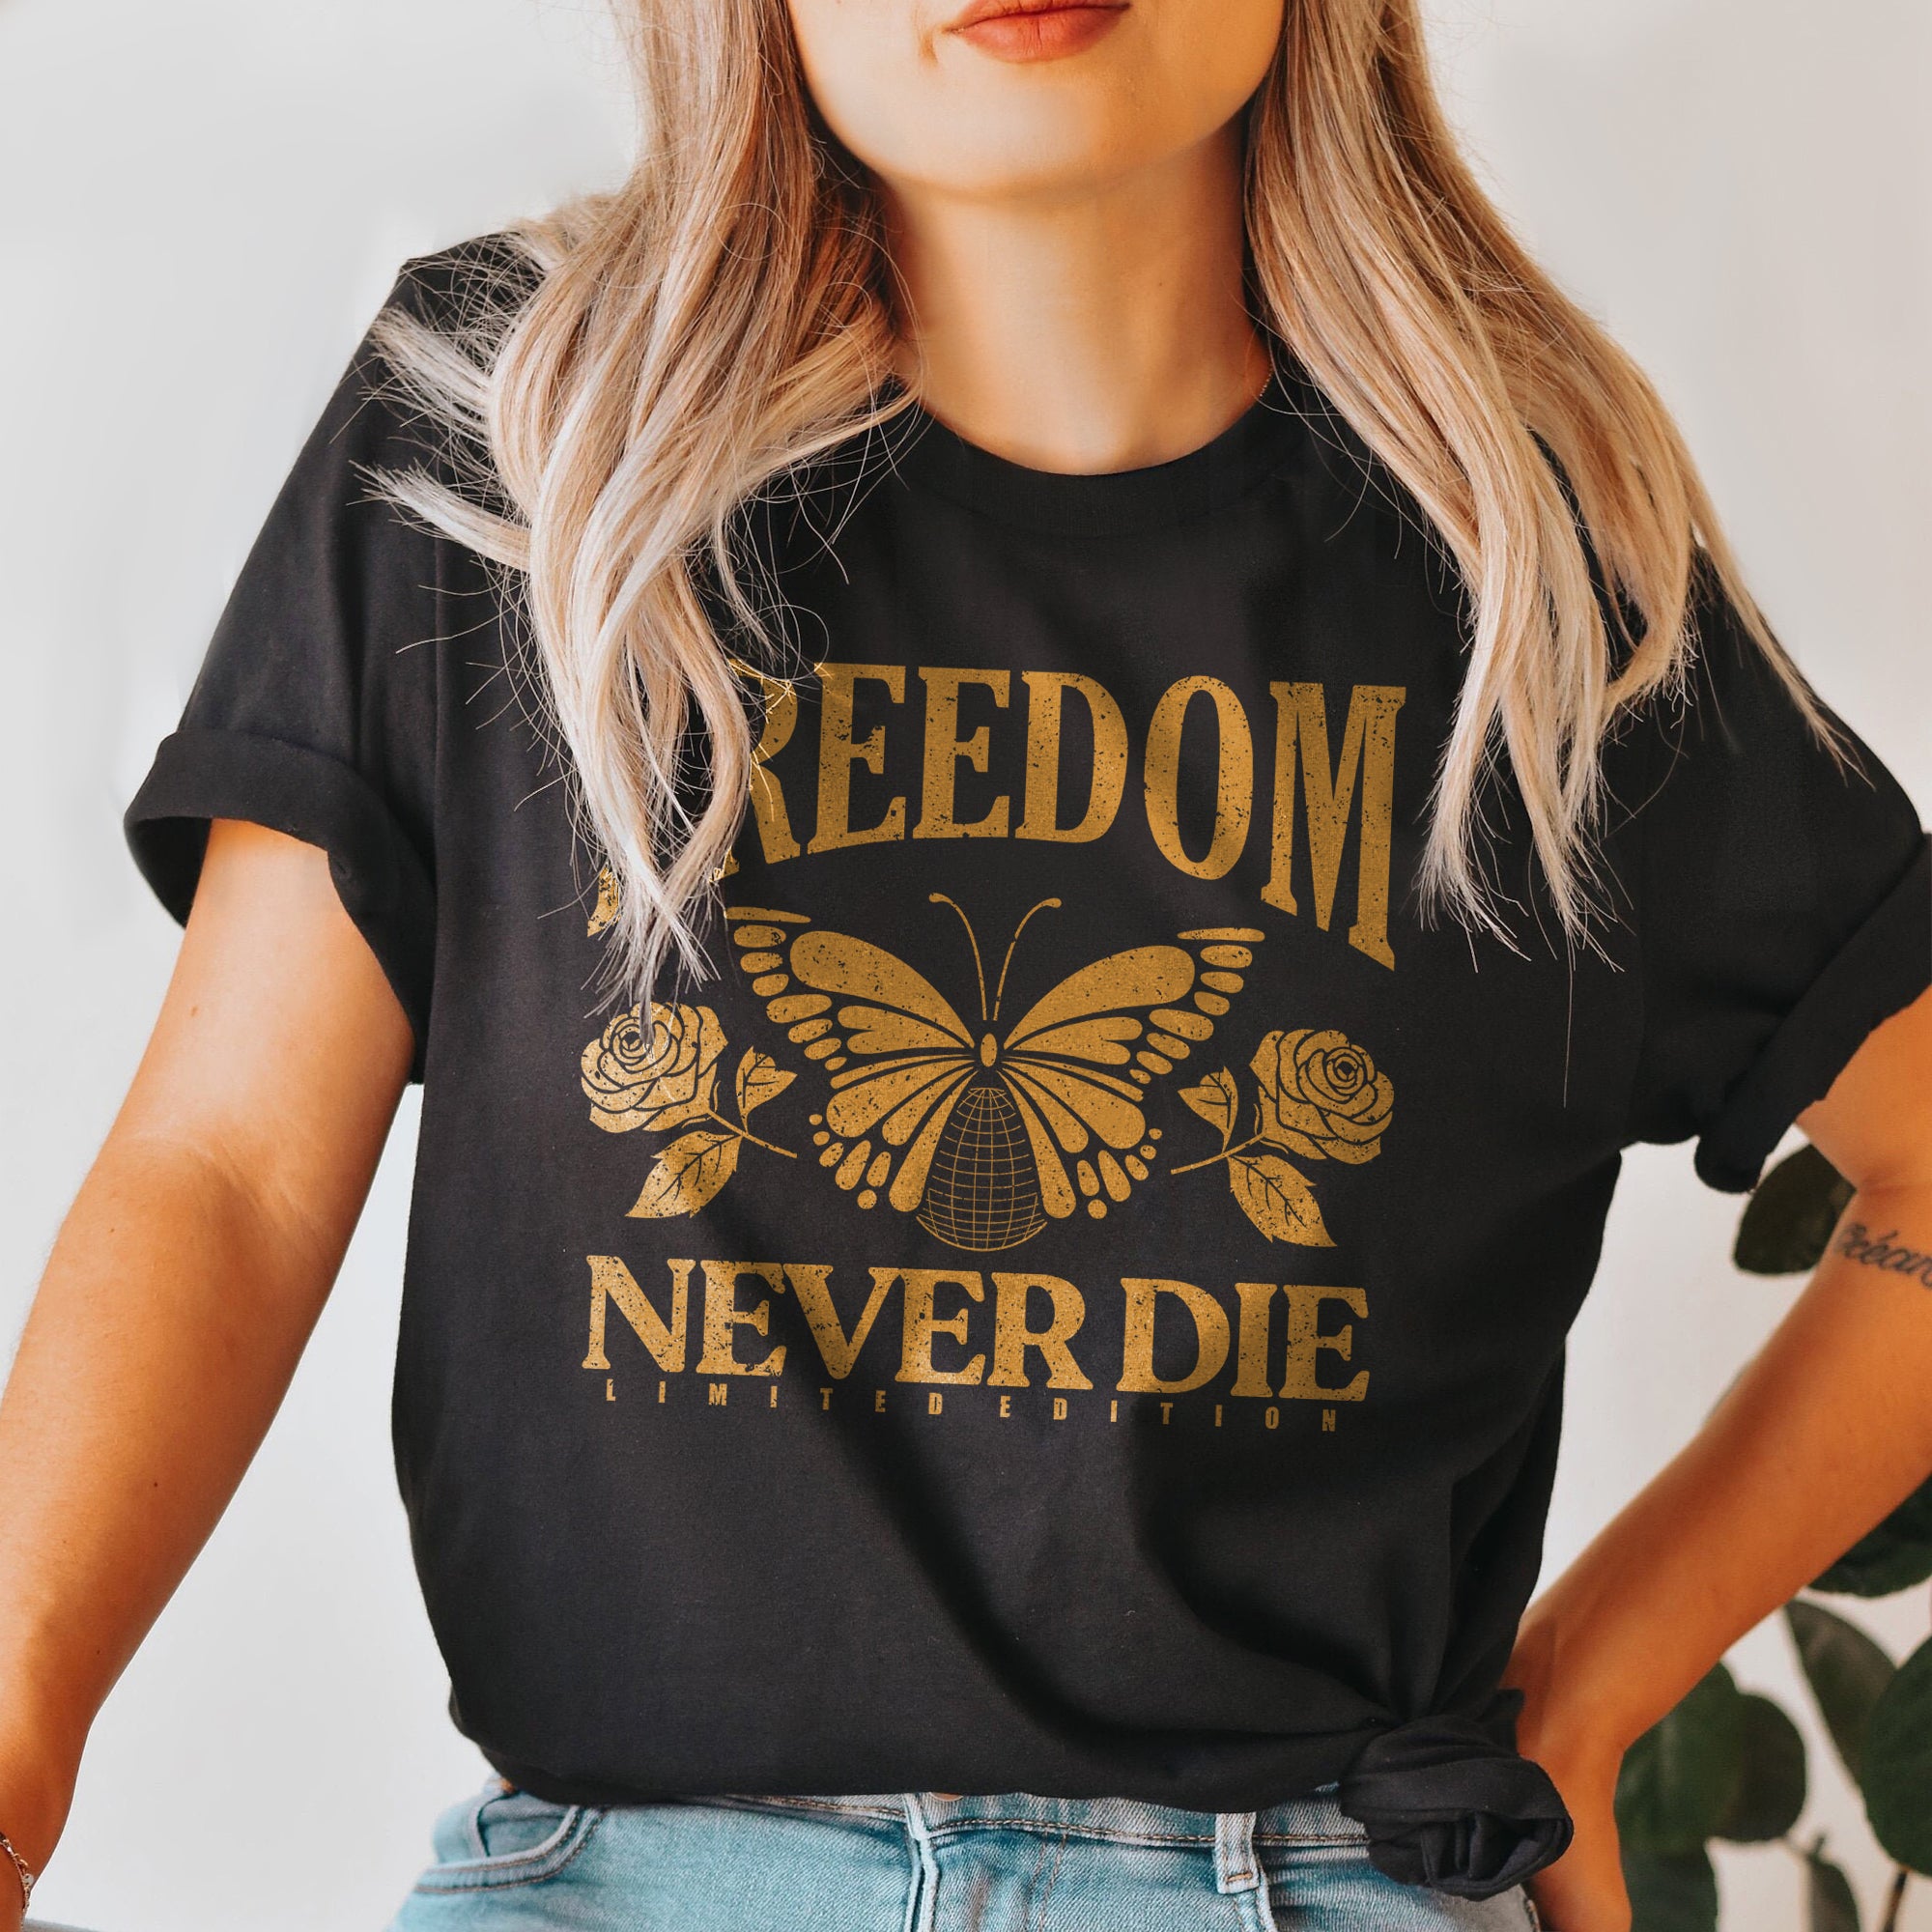 Freedom Never Die Oversized Shirt for Women Garment-Dyed Graphic Tee